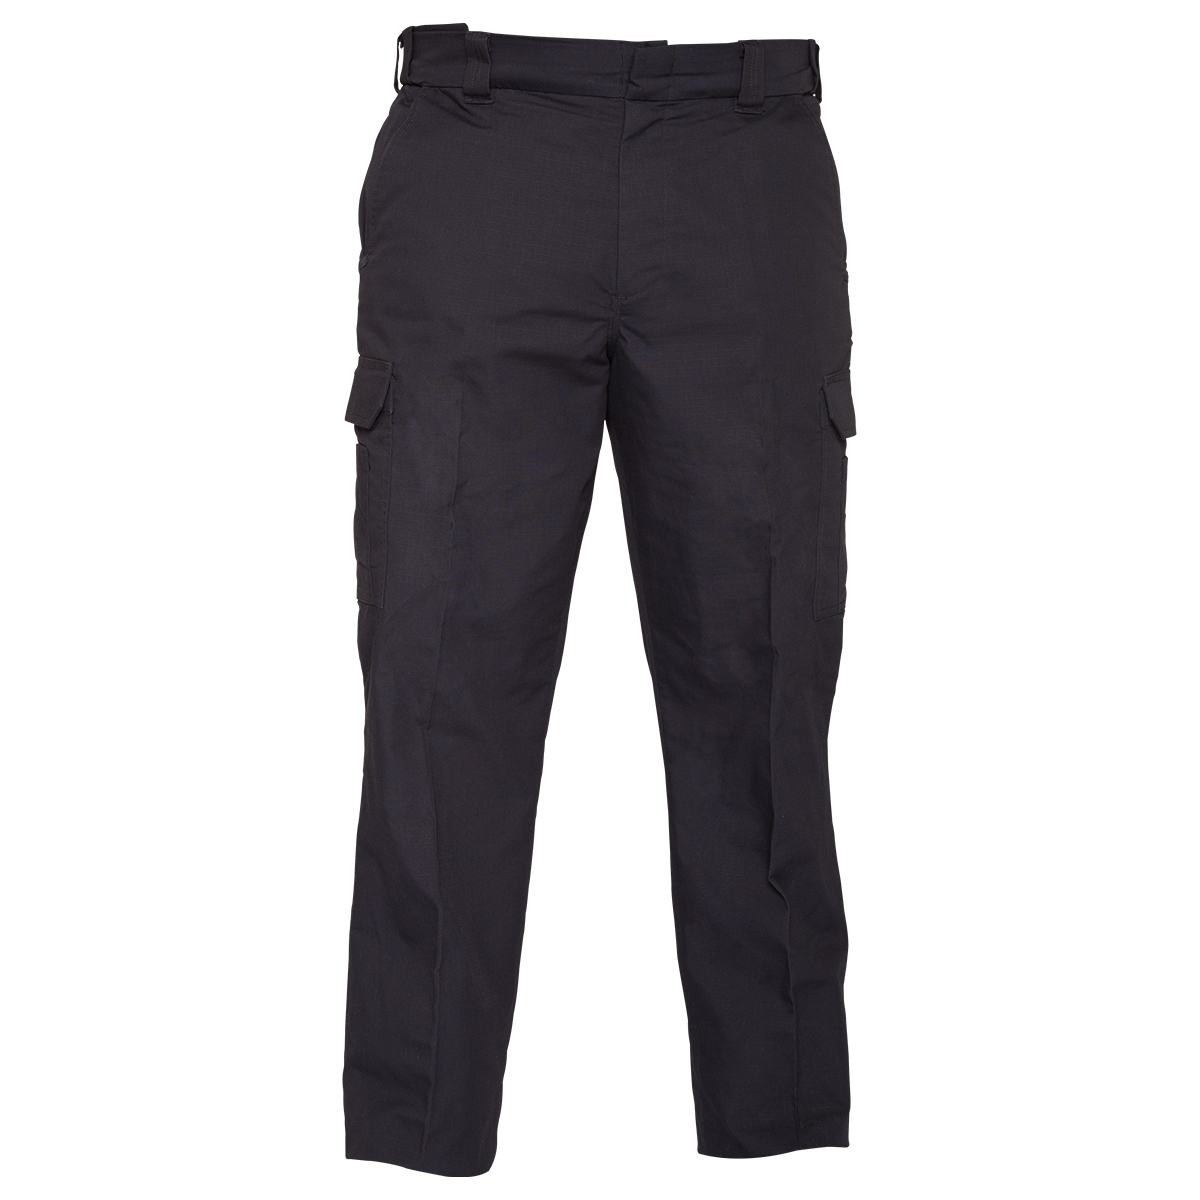 cargo pants for womens online